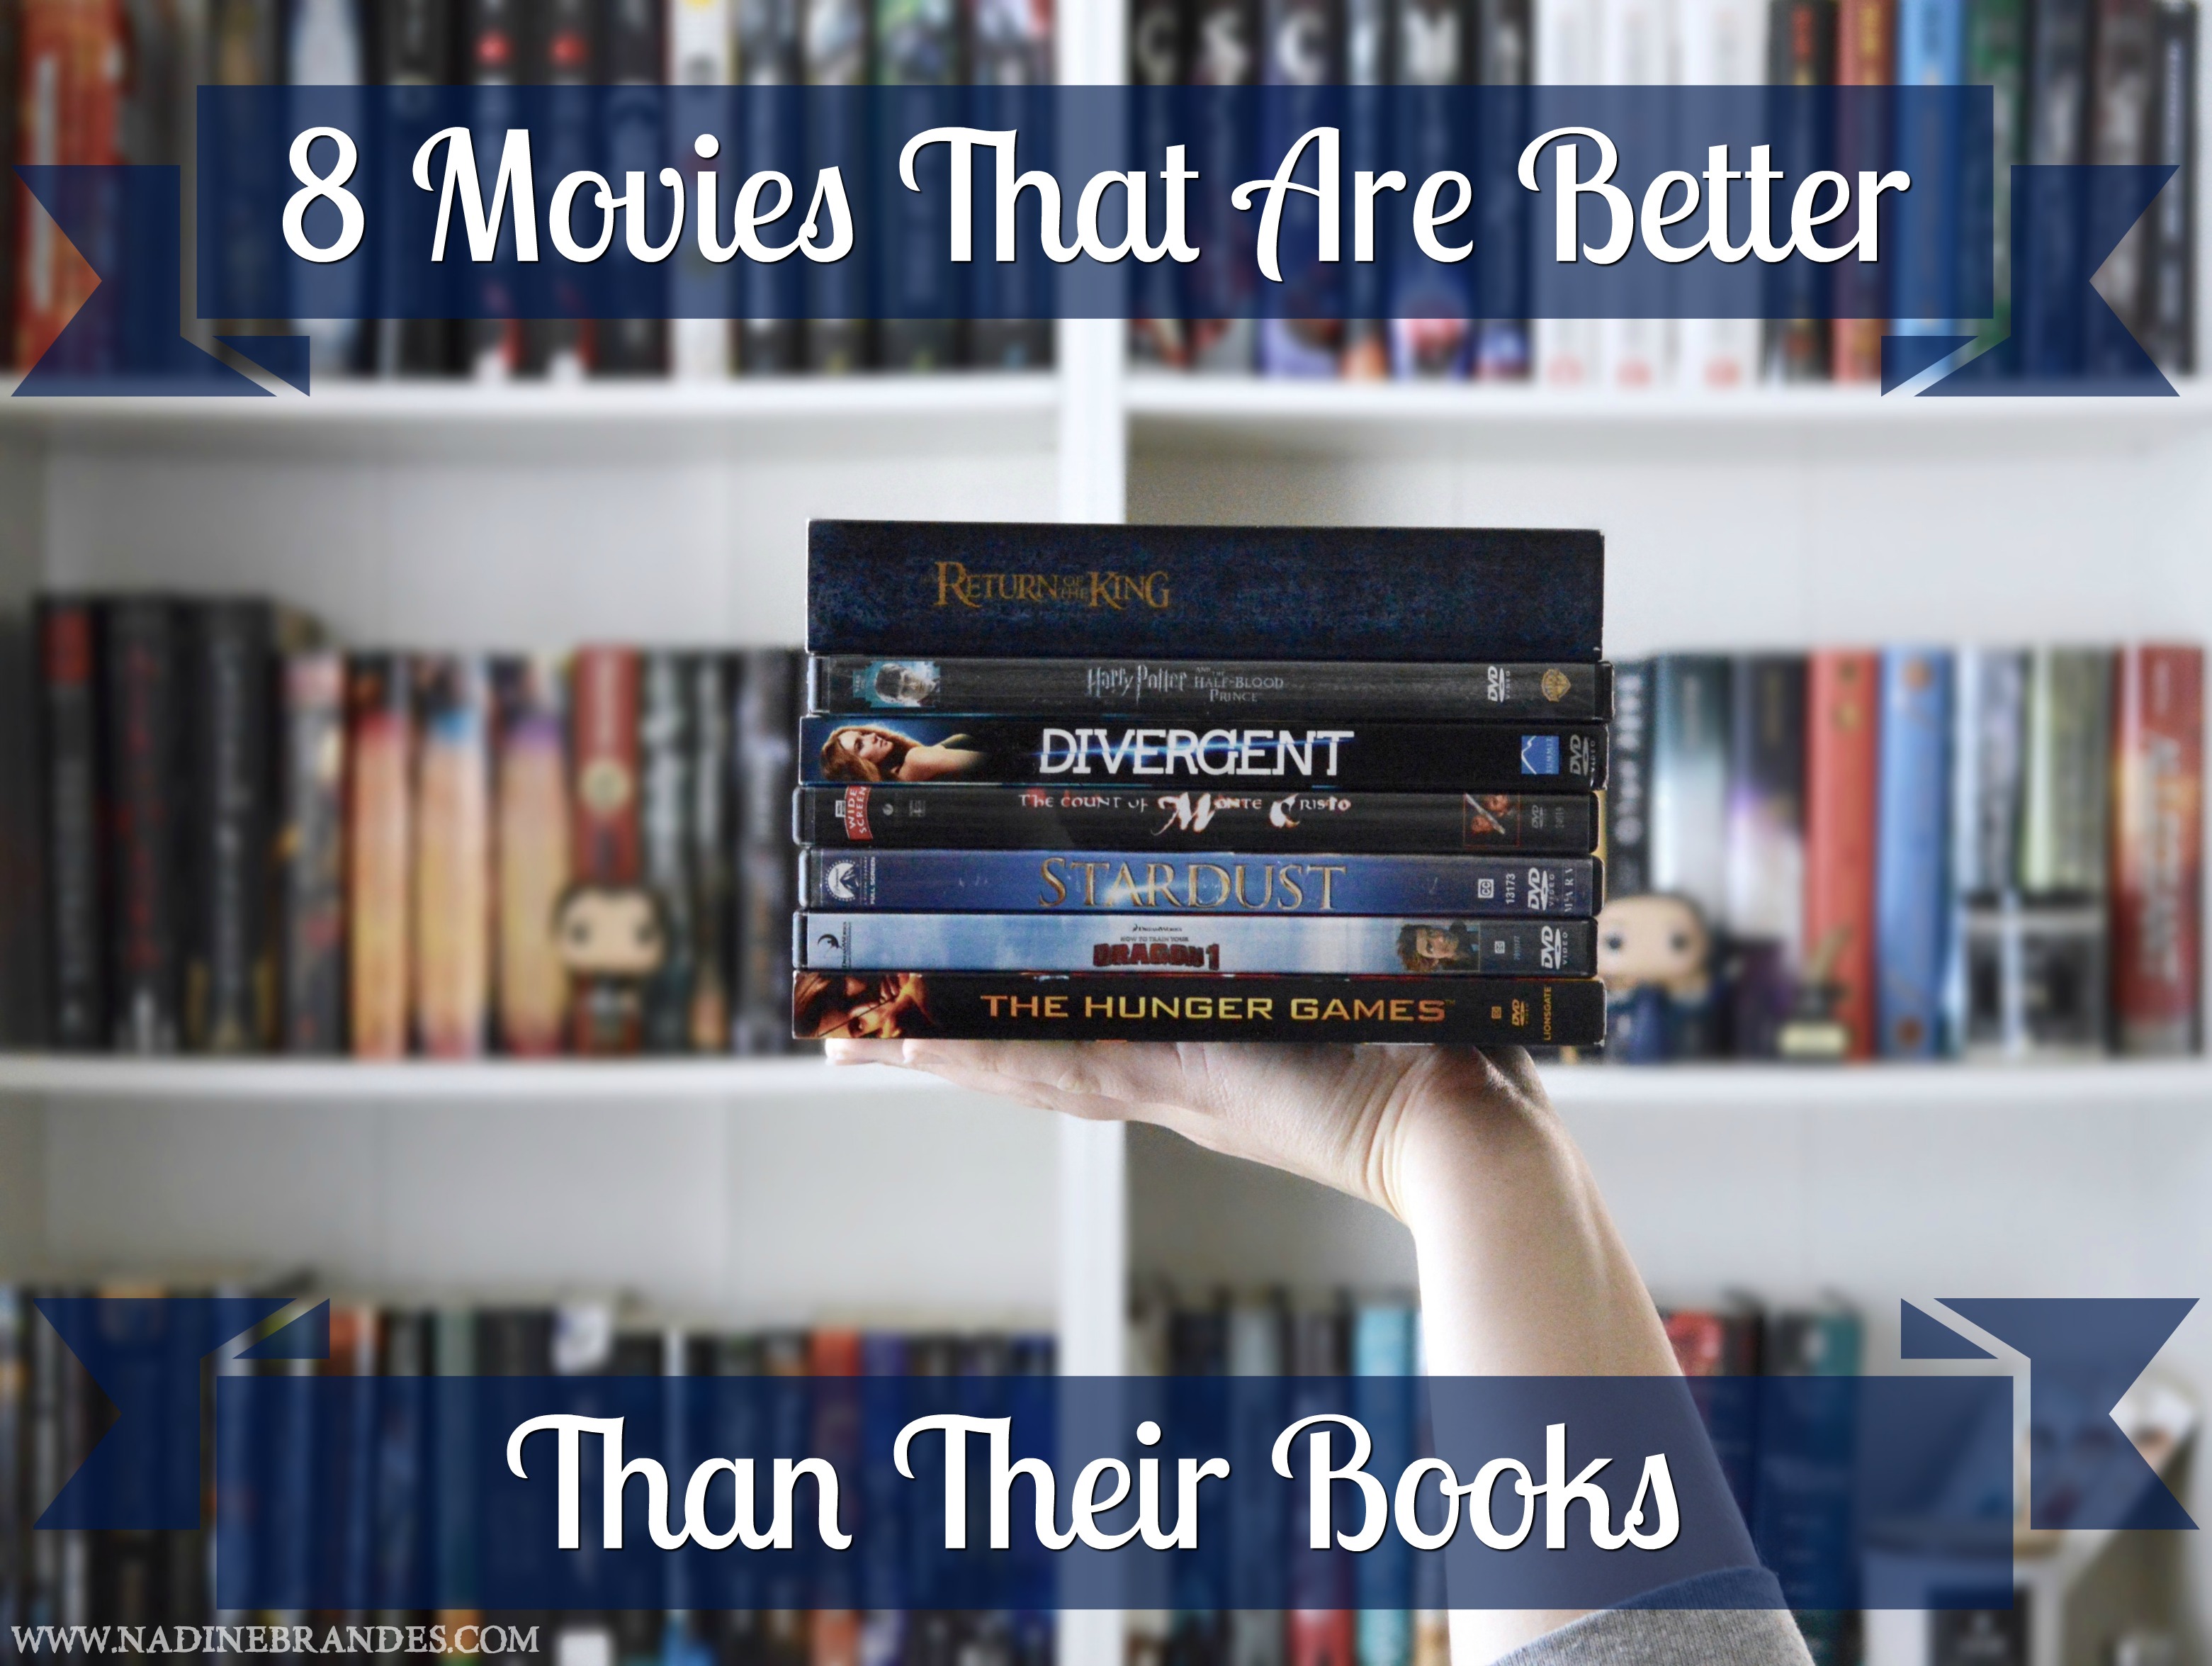 better than delicious library for cataloging movies